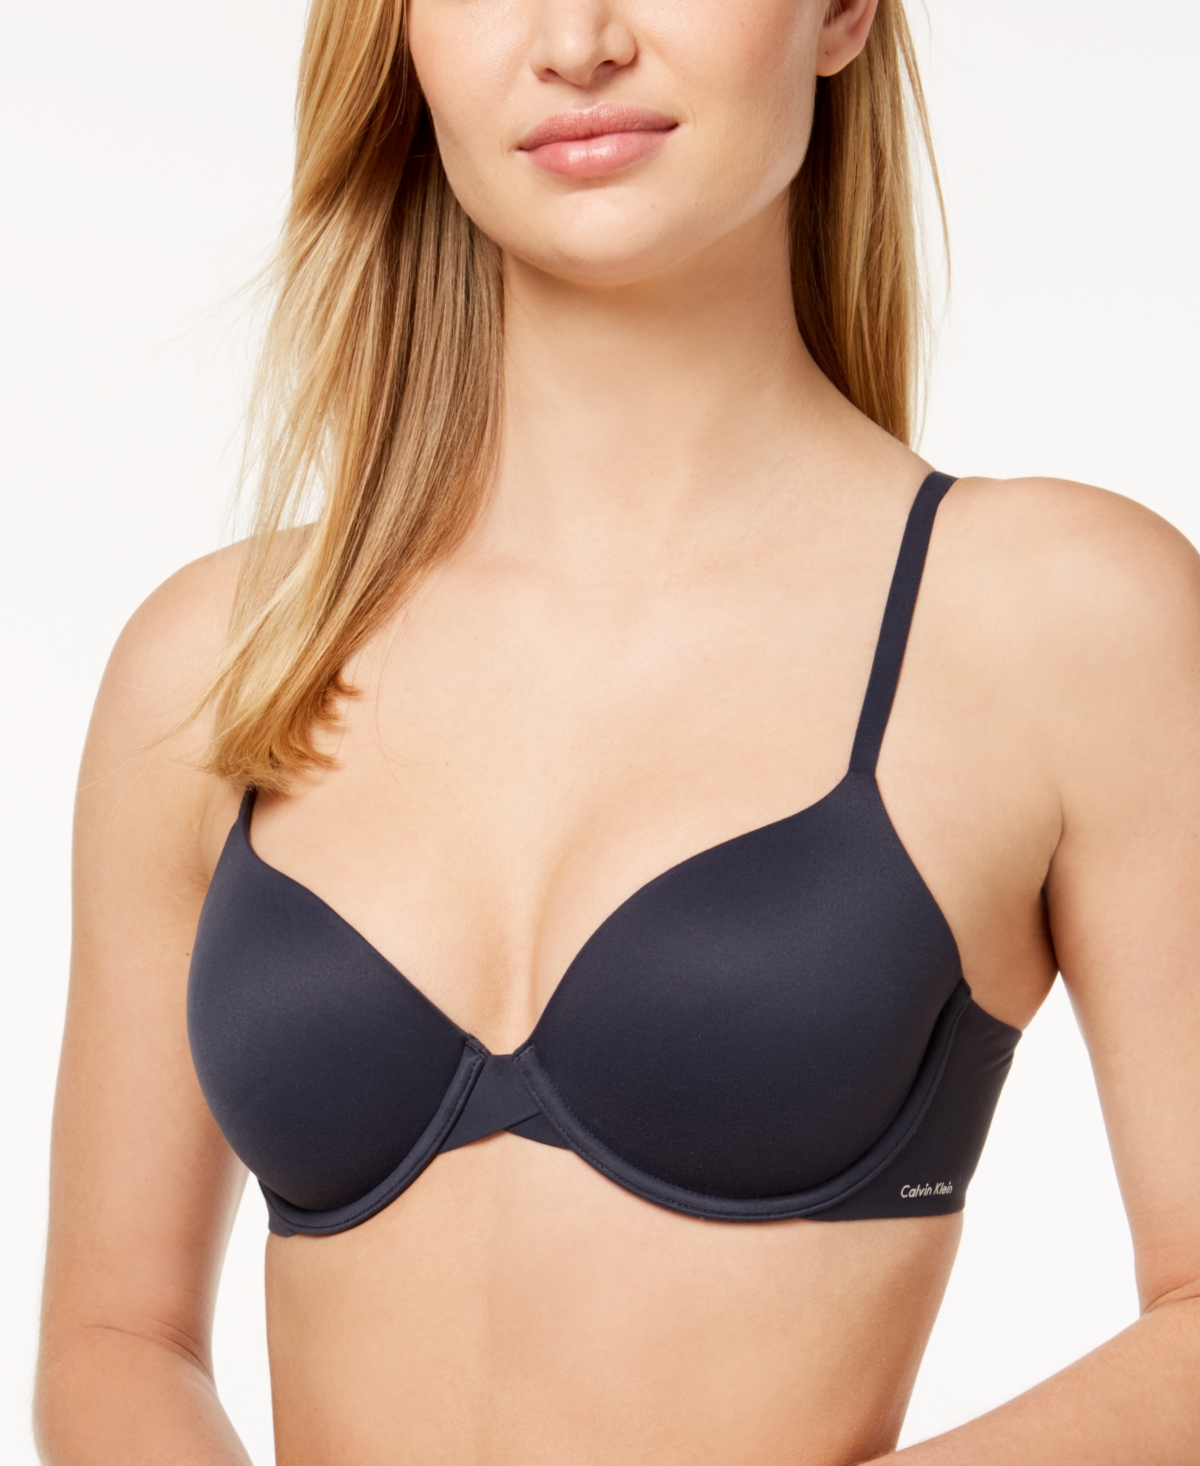 UPC 011531137608 product image for Calvin Klein Perfectly Fit Full Coverage T-Shirt Bra F3837 | upcitemdb.com